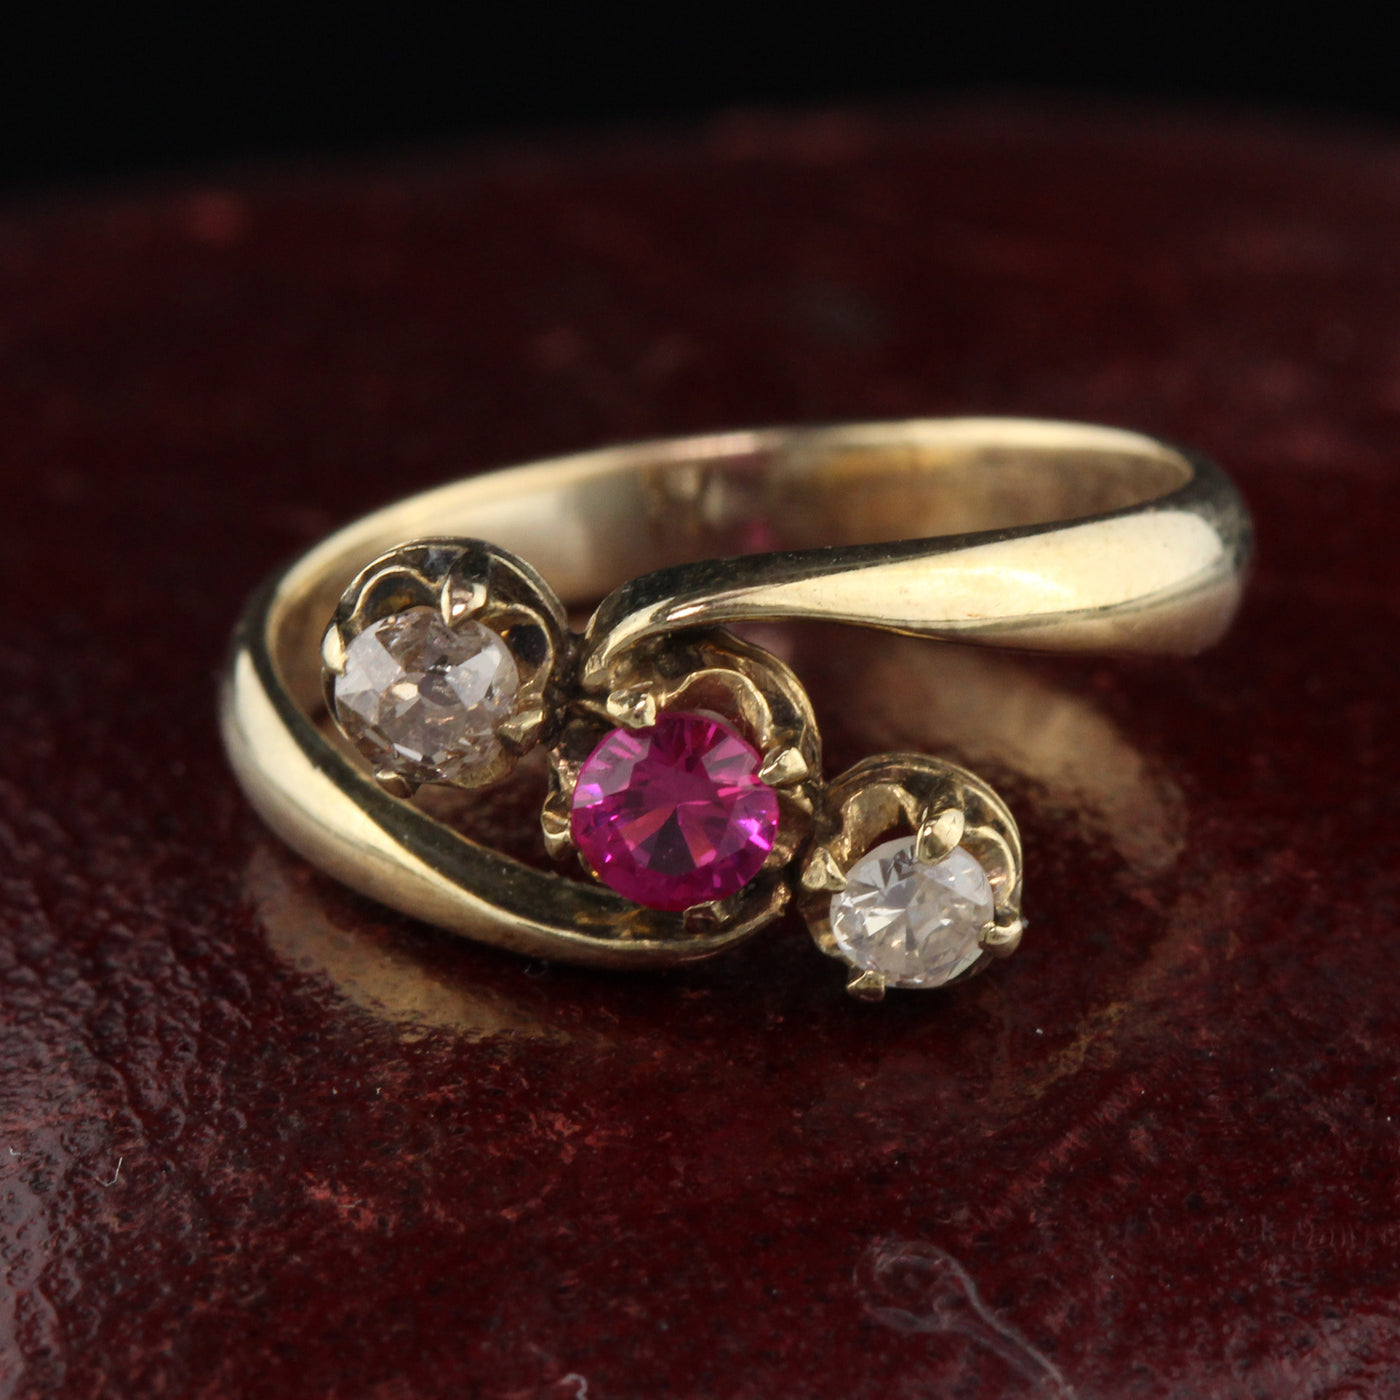 Antique Victorian 14K Yellow Gold Ruby & Diamond 3-Stone Ring - The Antique Parlour